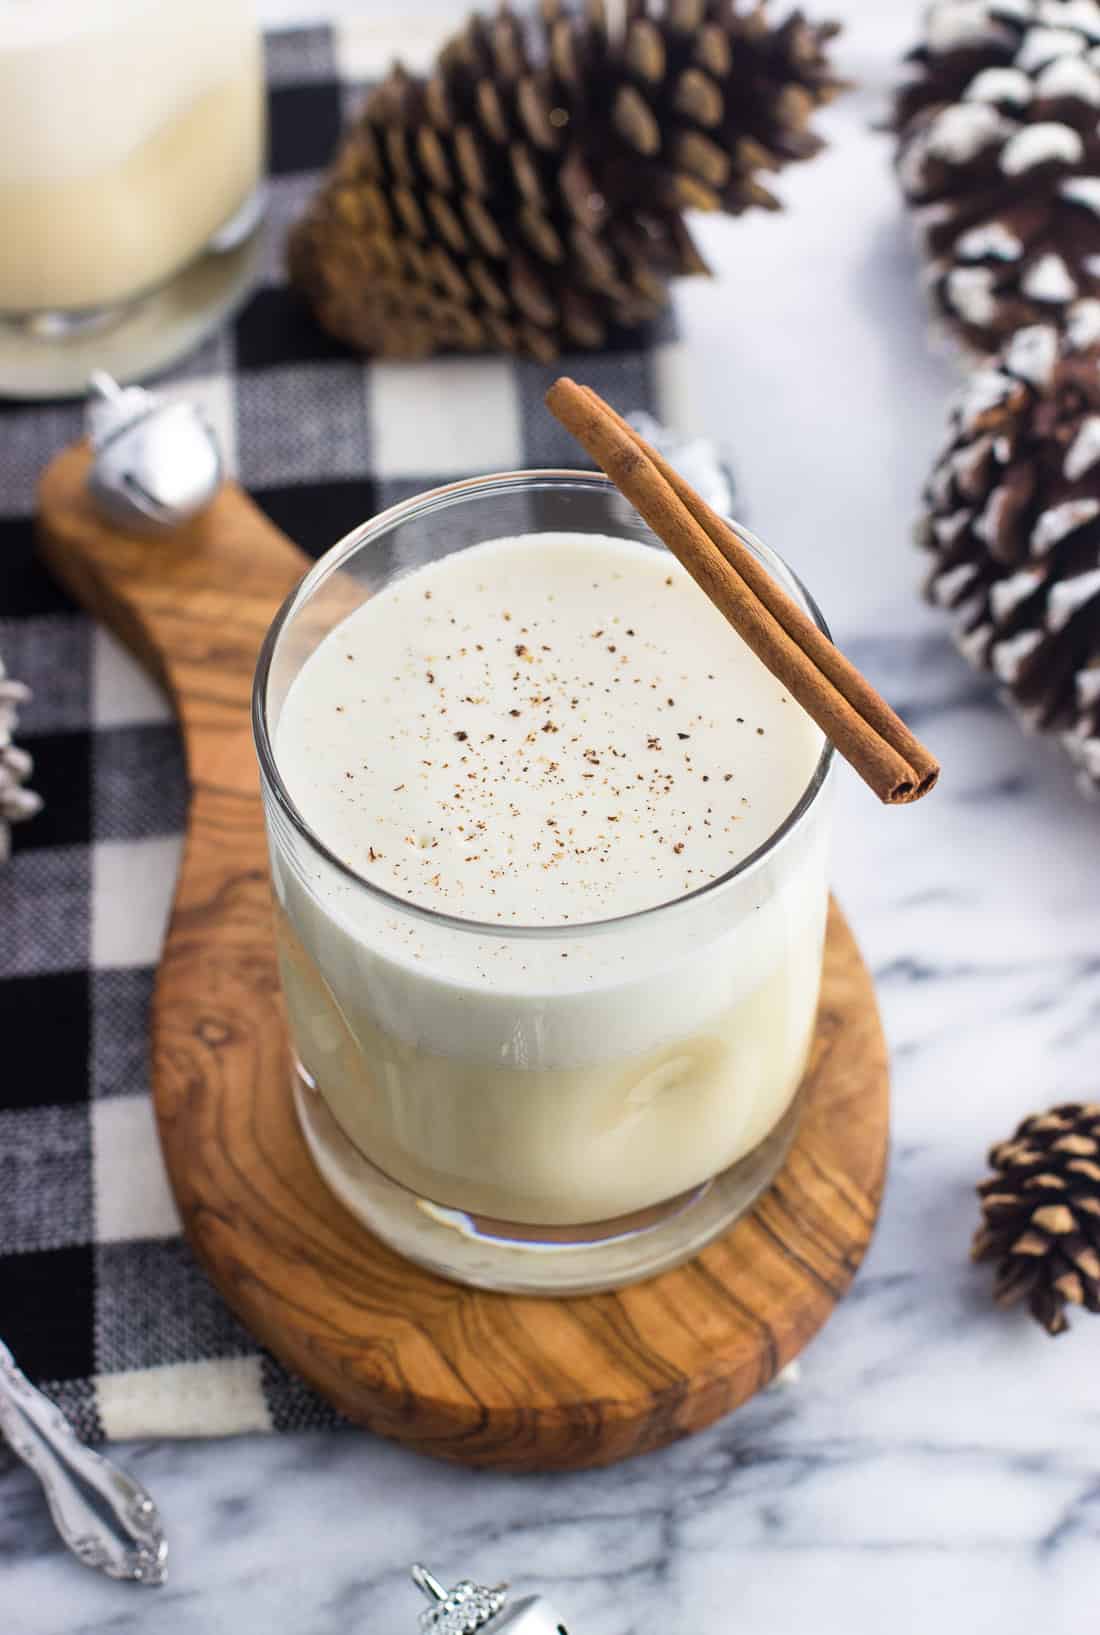 A glass of cooked eggnog on a wooden board garnished with a cinnamon stick